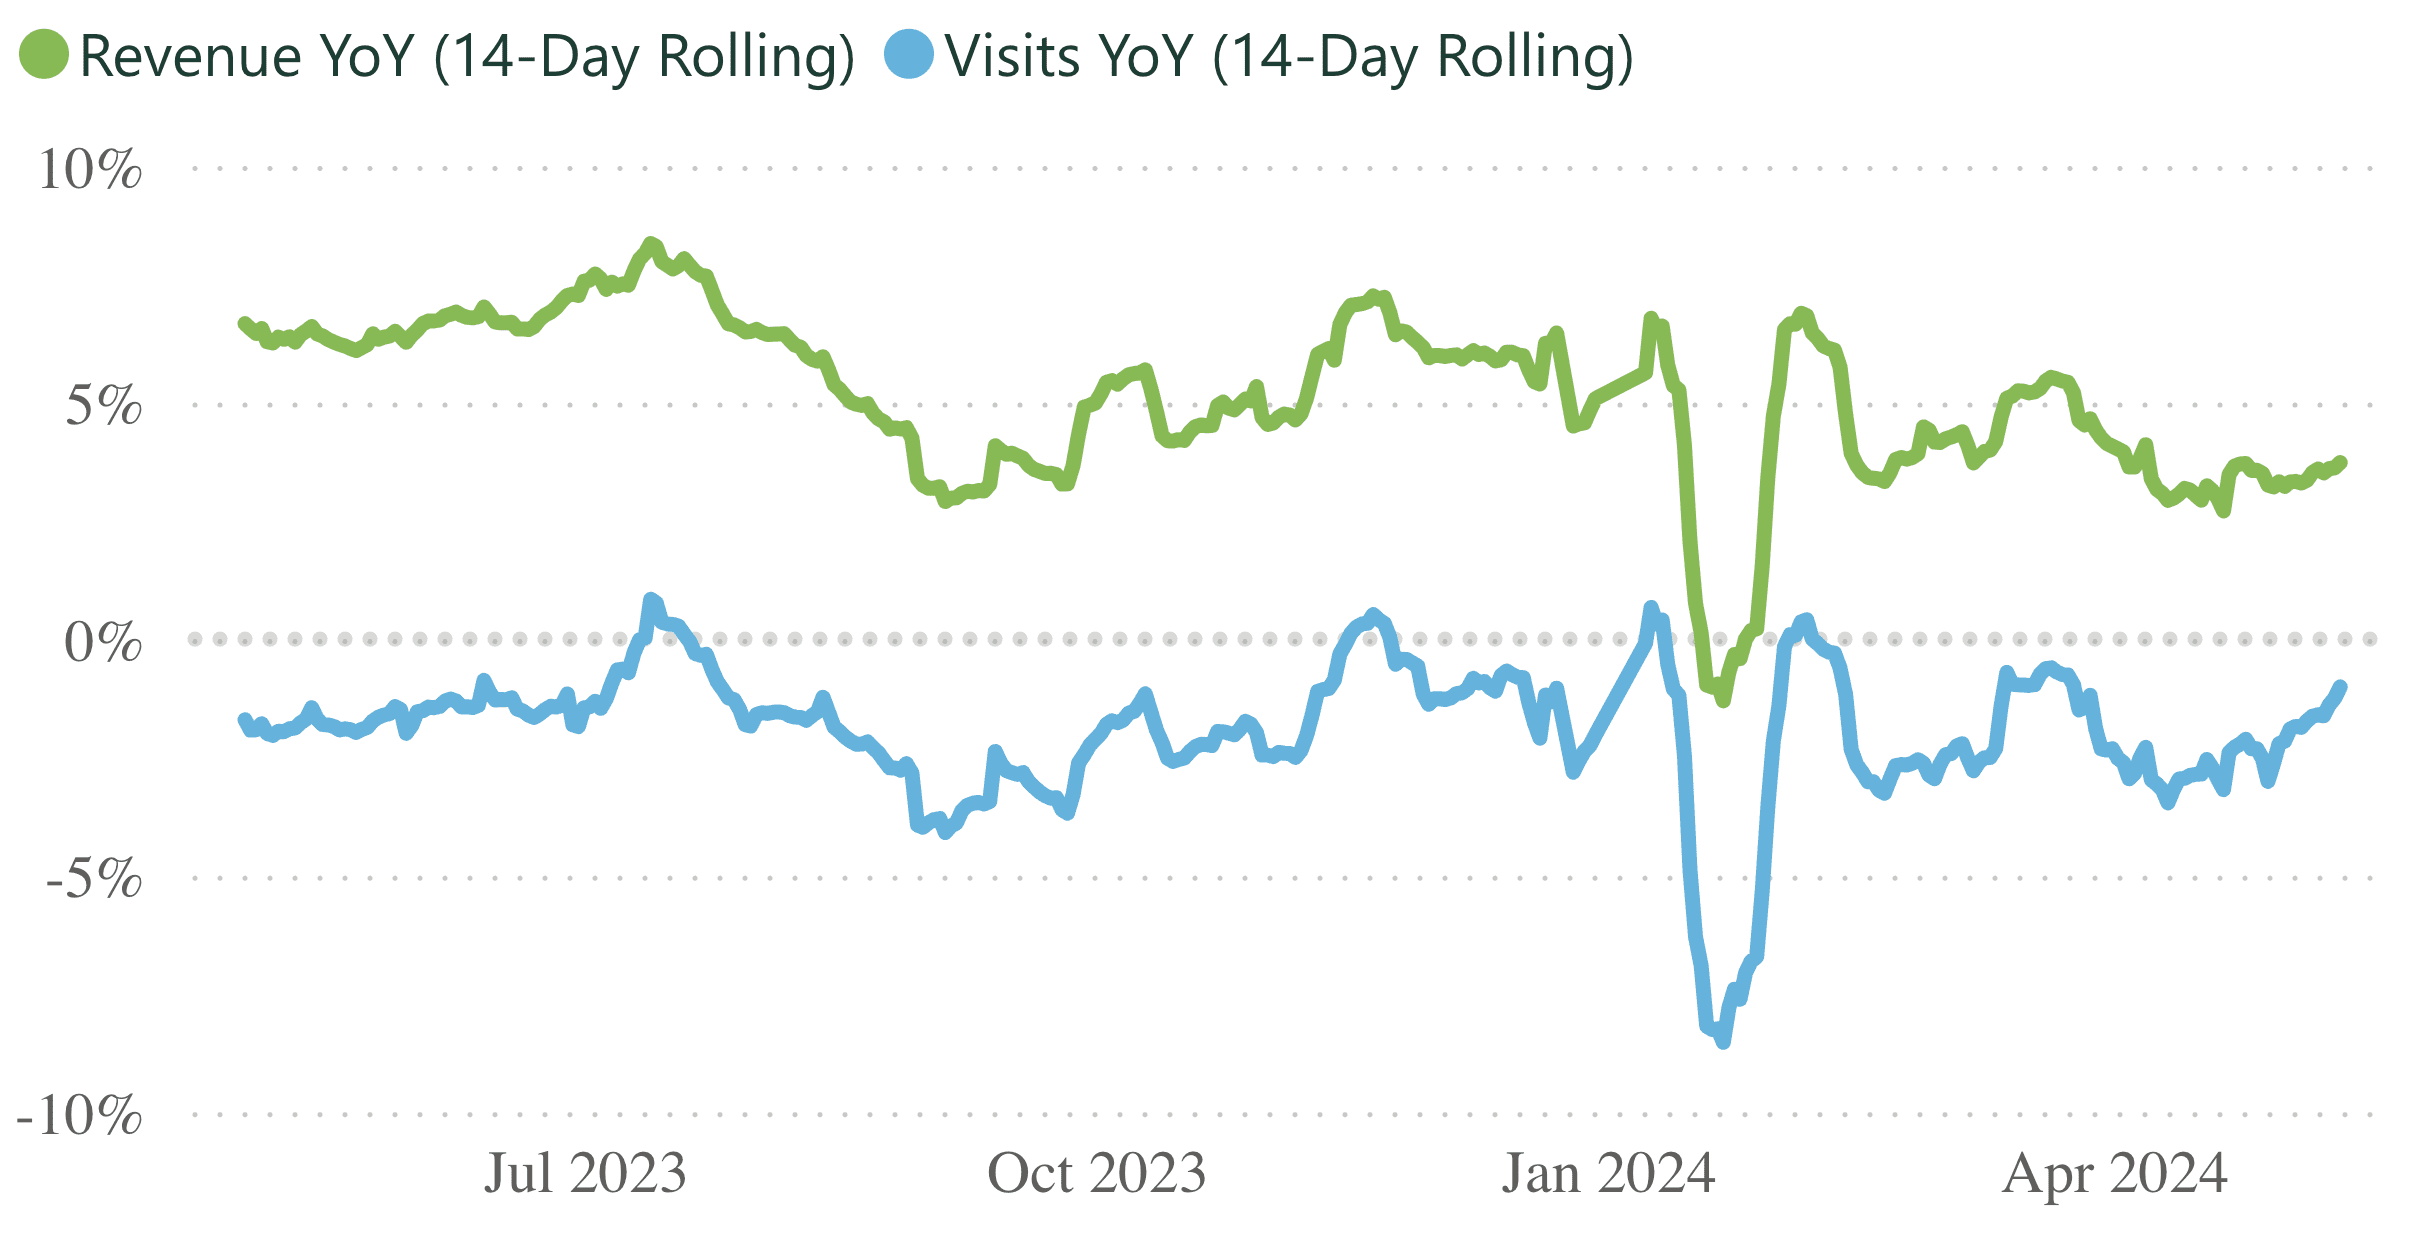 A line graph showing revenue and visits per practice, for a 14 day rolling period.